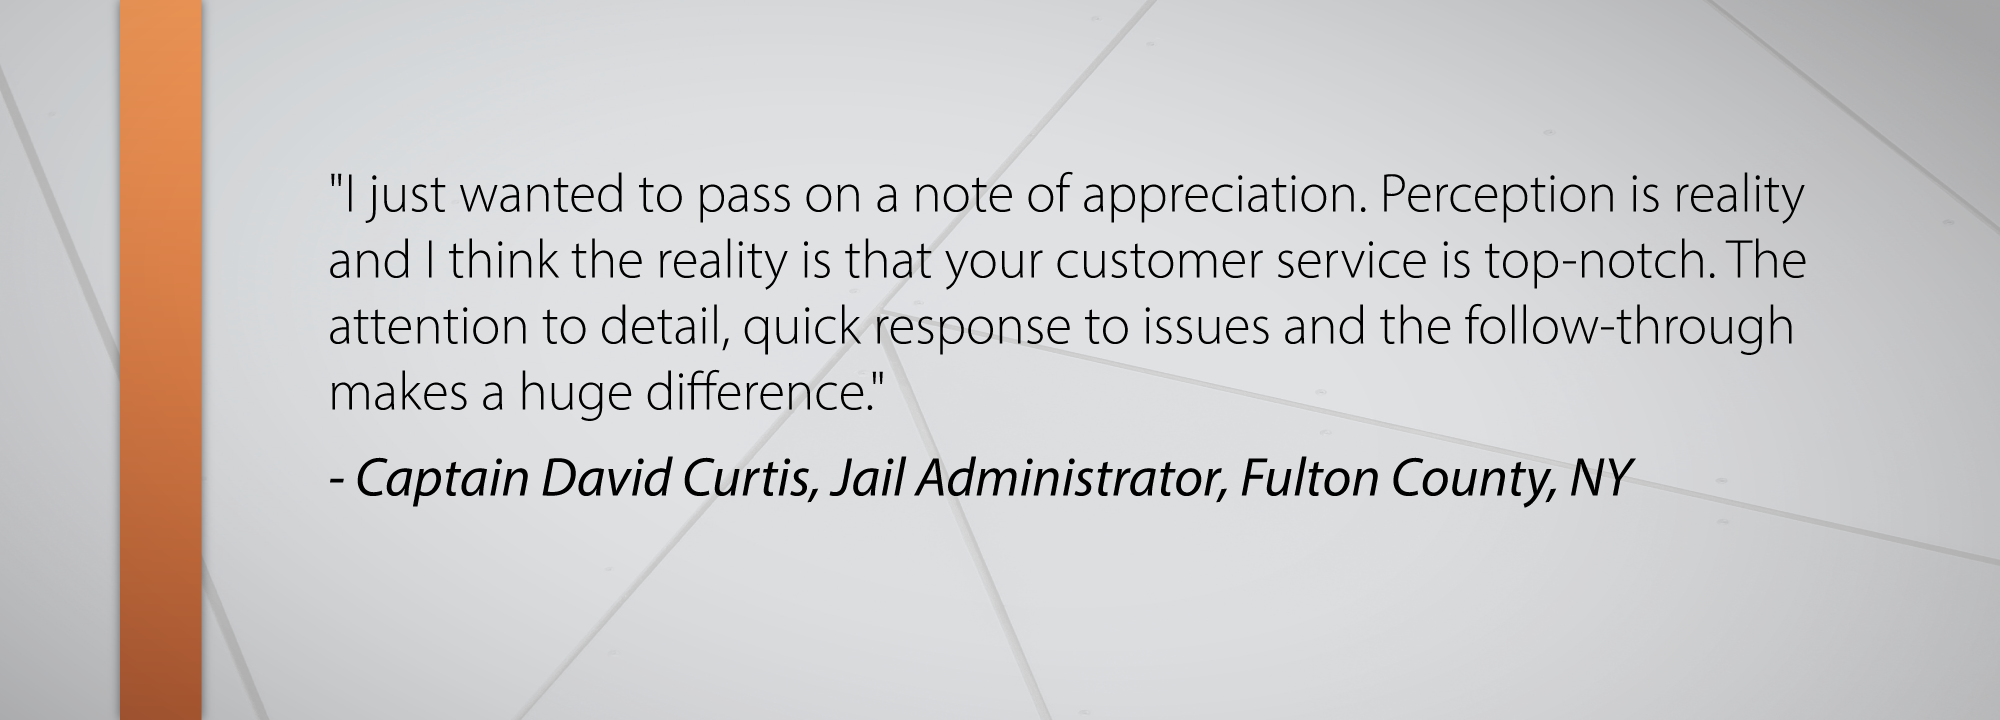 I just wanted to pass on a note of appreciation. Perception is reality and I think the reality is that your customer service is top-notch. The attention to detail, quick response to issues and the follow-through makes a huge difference. - Captain David Curtis Jail Administrator, Fulton County, NY